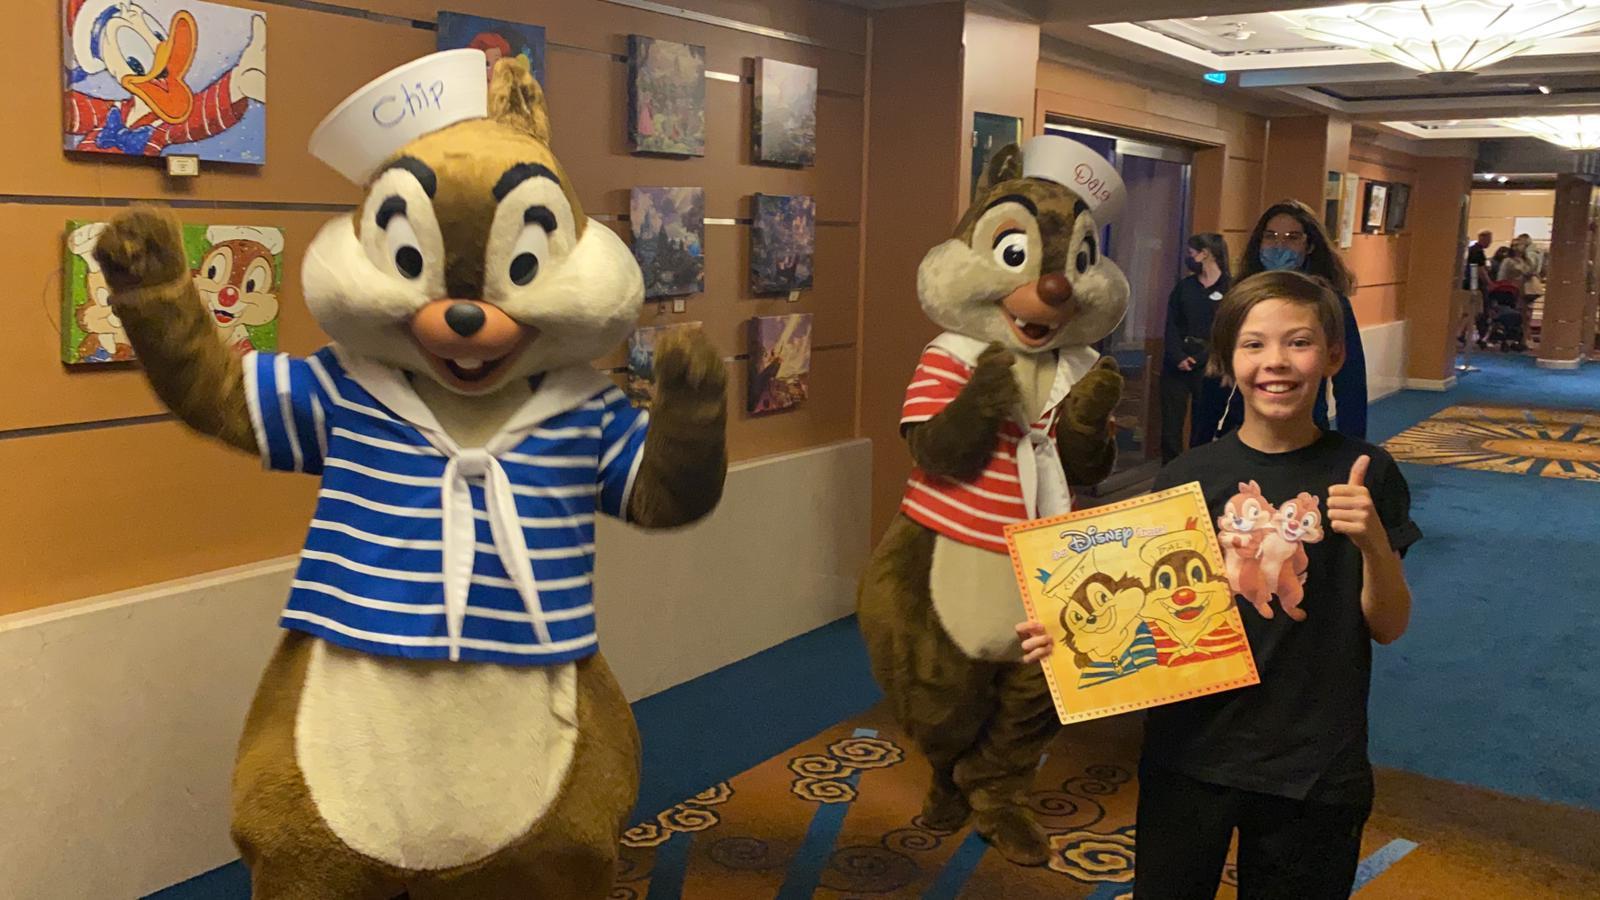 Joe meets his favourites, Chip n Dale on board